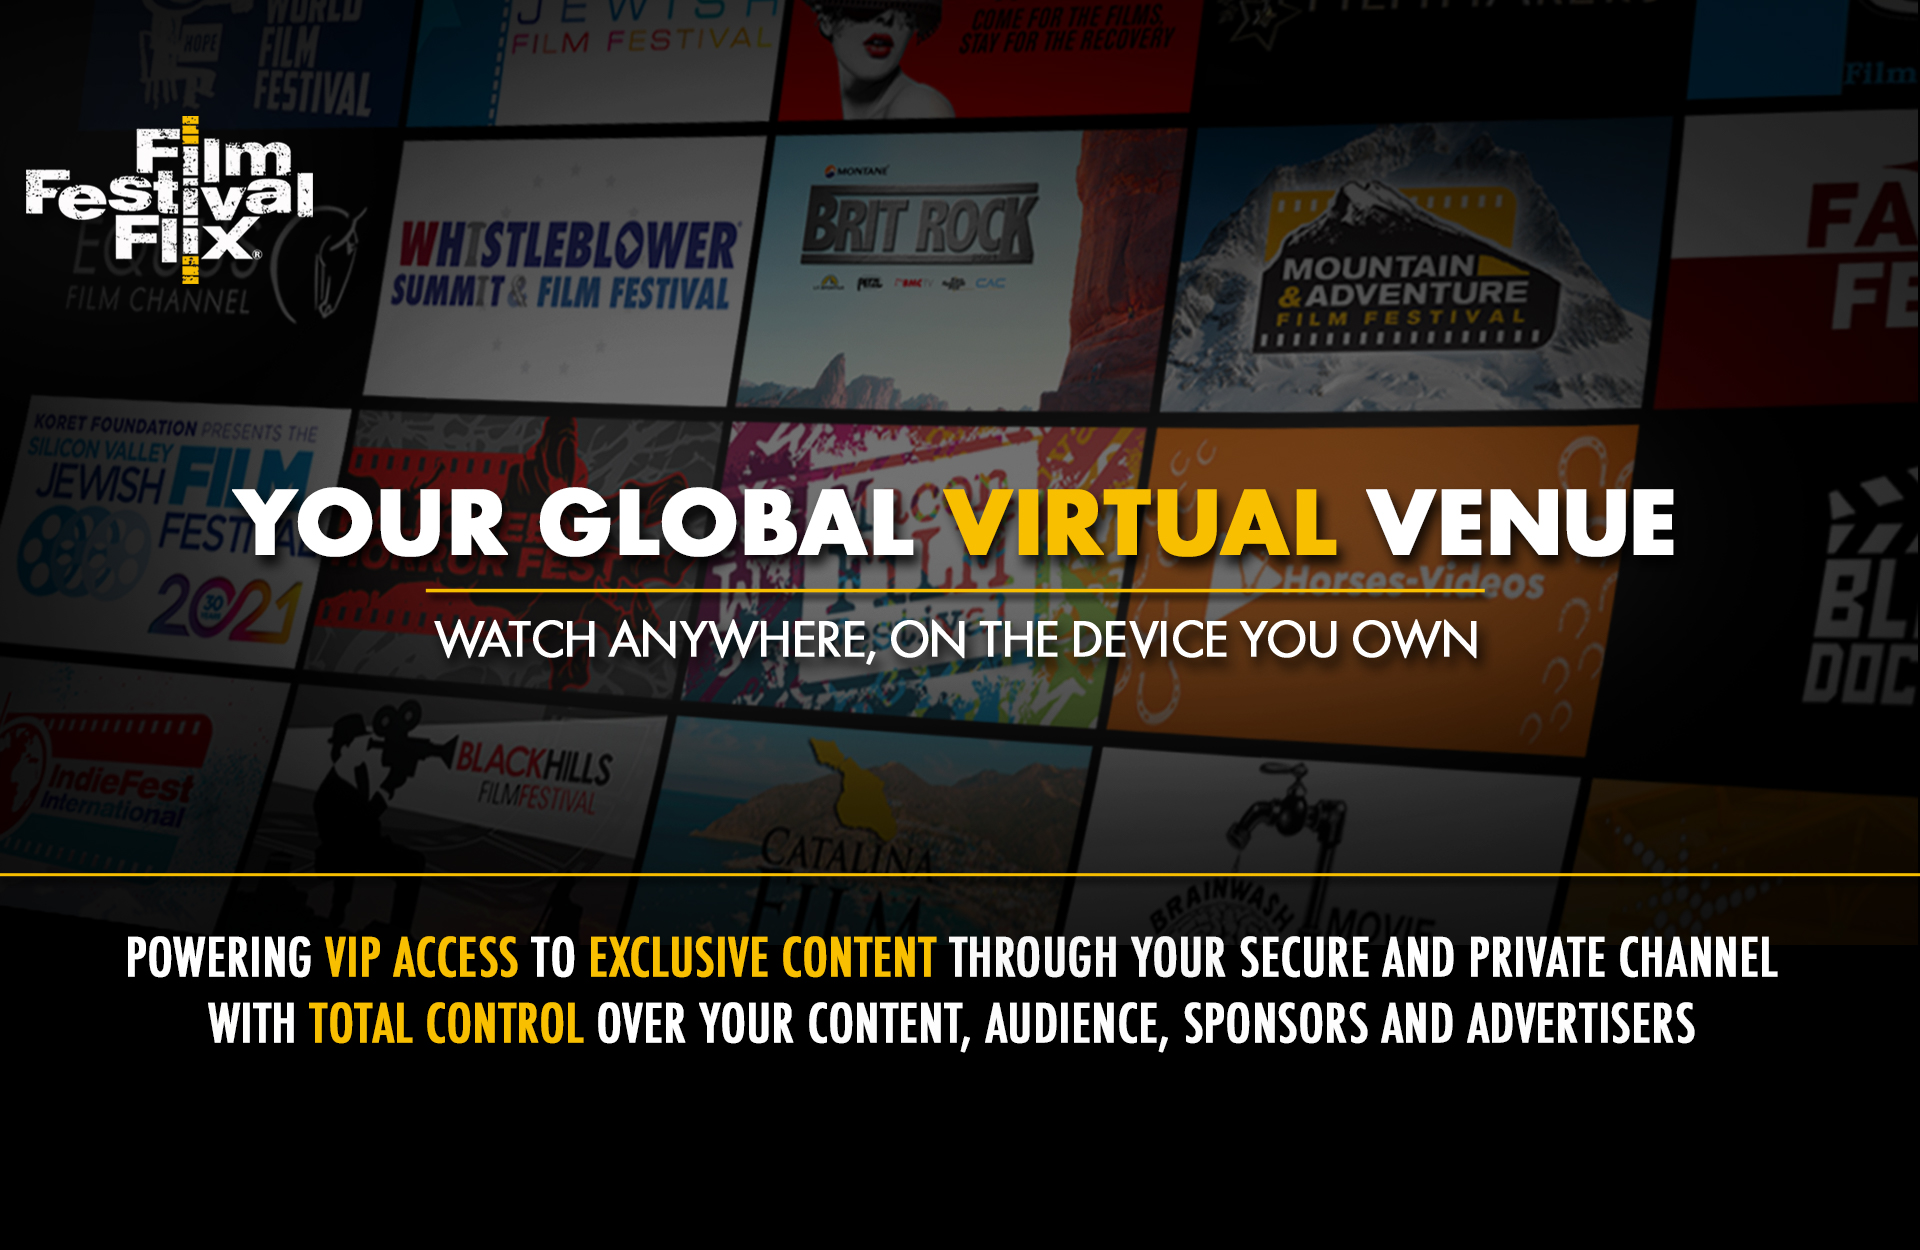 We power your virtual events: Festivals, Award-Winning Tours, Private Events and Year-round Streaming Channels on our secure platform while seamlessly integrating with your festival website. Since the COVID-19 pandemic, online film festivals have become a necessity for attendance to your events. Many organizations had to cancel in person events while coming up with virtual screenings to support streaming films. Here at Film Festival Flix, we have helped numerous festivals create that opportunity, allowing them to gain a world wide audience, a true hurdle with the original approach. Now, filmmakers have their feature films safely seen by more people and have the chance to create a film community not bound by physical location. As a streaming service, we work with festivals and expert curators to provide both subscription and rental based on-demand streaming access to select, award-winning and critically acclaimed films. All available on our Website and our Film Festival Flix Streaming Apps - Apple TV, Roku, Android, Amazon Fire, IOS Mobile." width="1920" height="1250" class="aligncenter size-full wp-image-374530" /><img src="https://cdn.filmfestivalflix.com/wp-content/fff-uploads-bucket/2022/08/220816_FFF_Channel-Pricing_1920x1080.jpg" alt="Launch your own secure and private channel on Film Festival Flix offering VIP access to exclusive content with total control over your content, audience, sponsors, and advertisers. Plans start as low as $999.